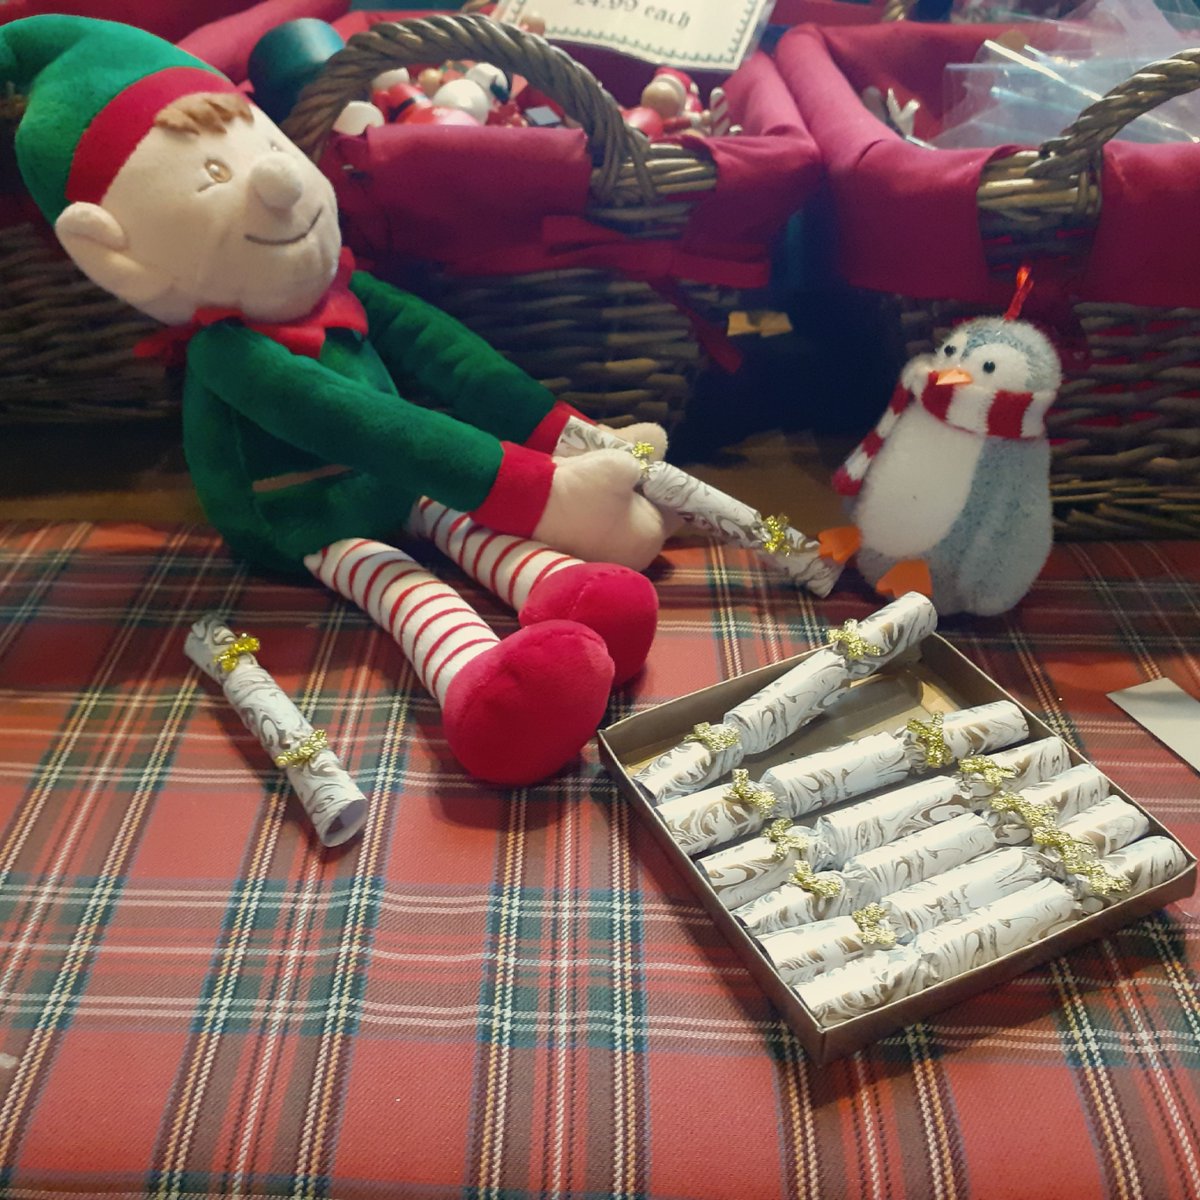 Elfred and Sammy are practising their cracker pulling. At least they are having fun!
#theoldechristmasshoppe #advent #23 #christmas #elf